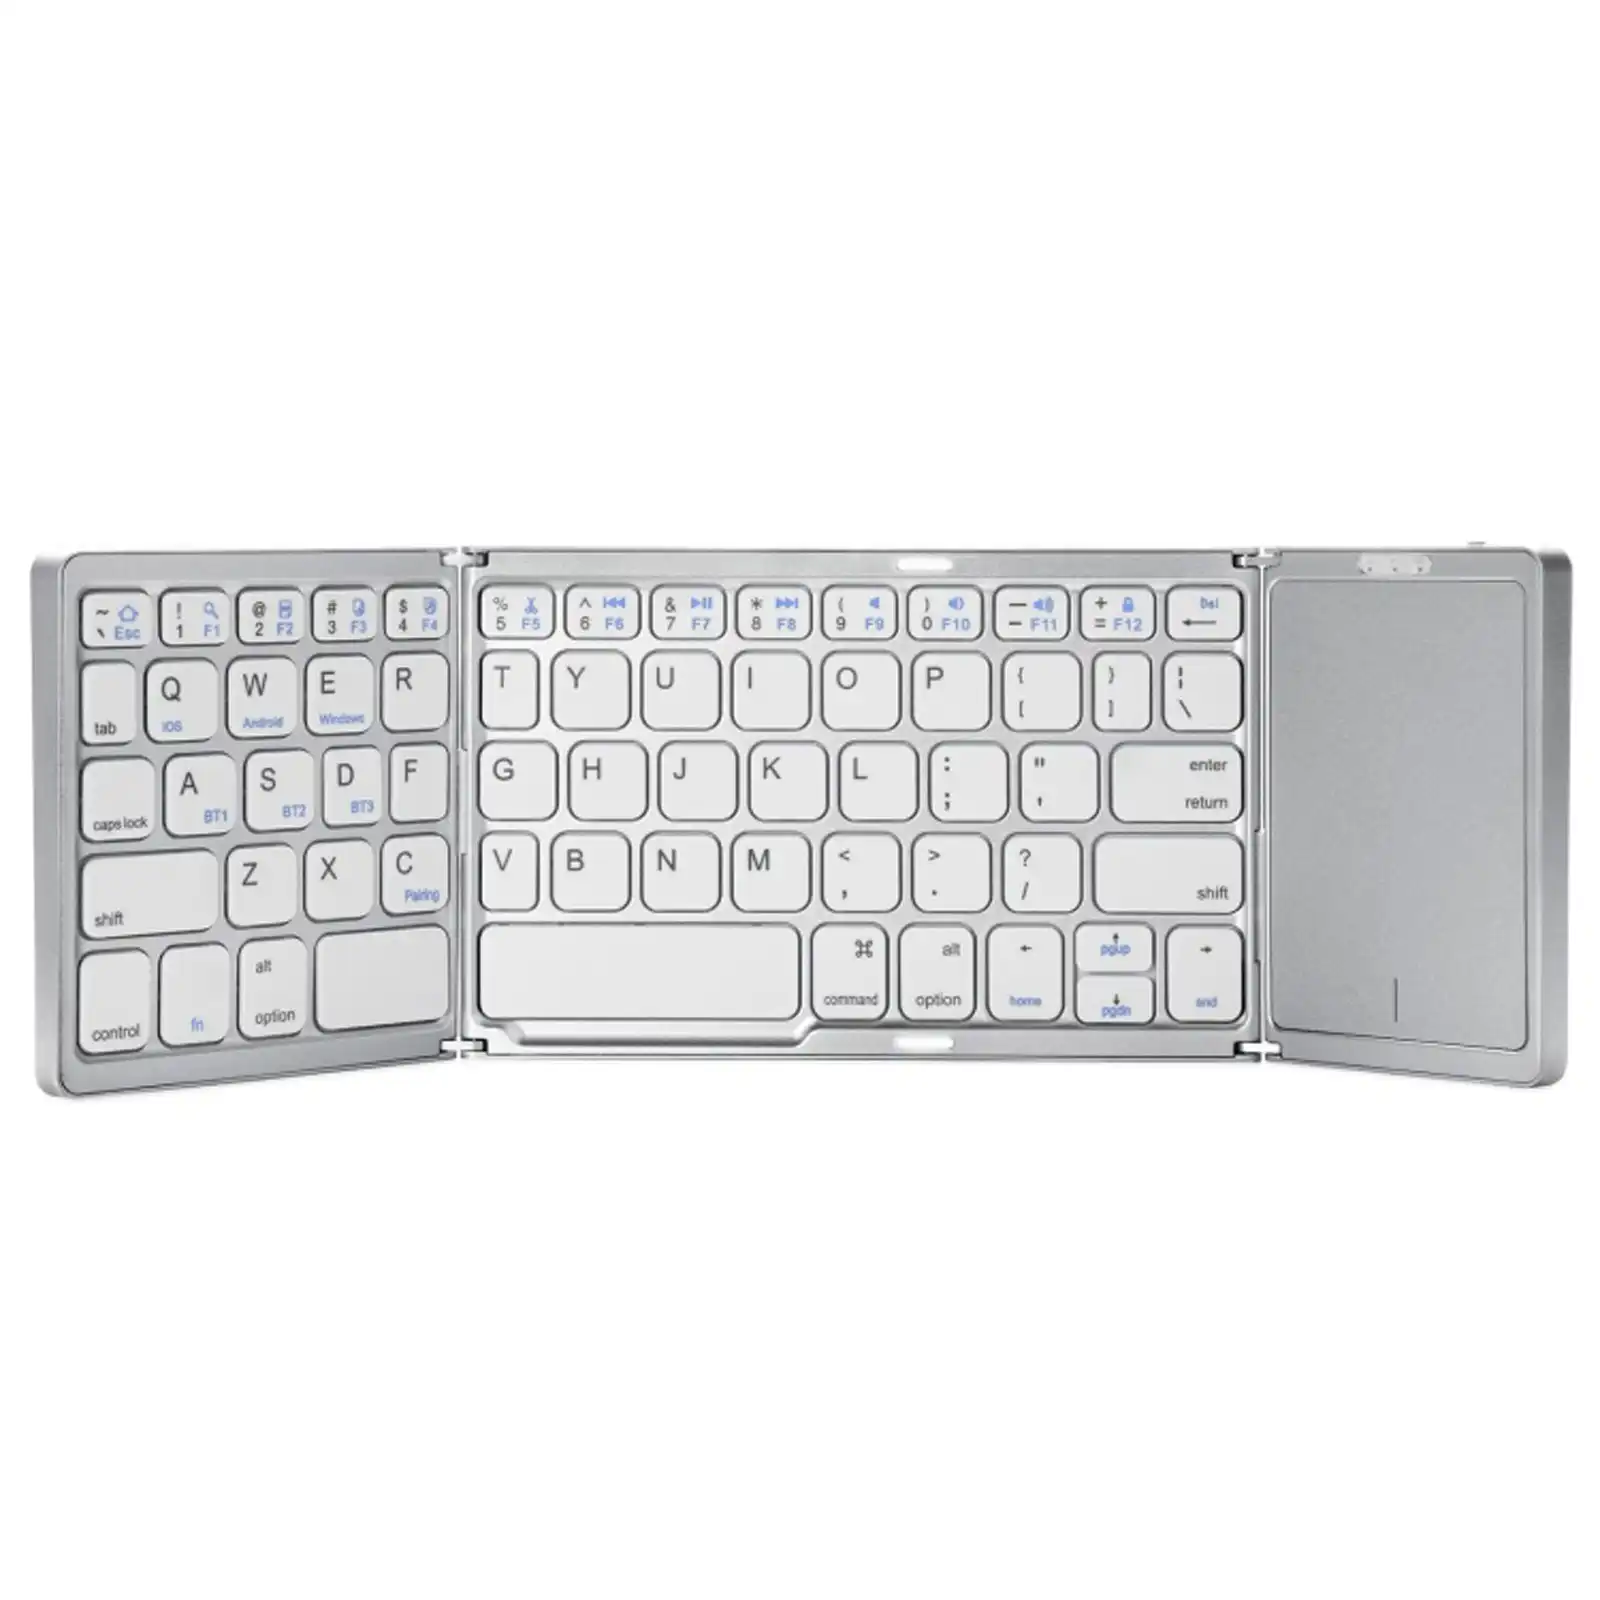 TODO Folding Bluetooth Wireless Keyboard Touchpad BT 5.1 Mac Windows Android - Silver